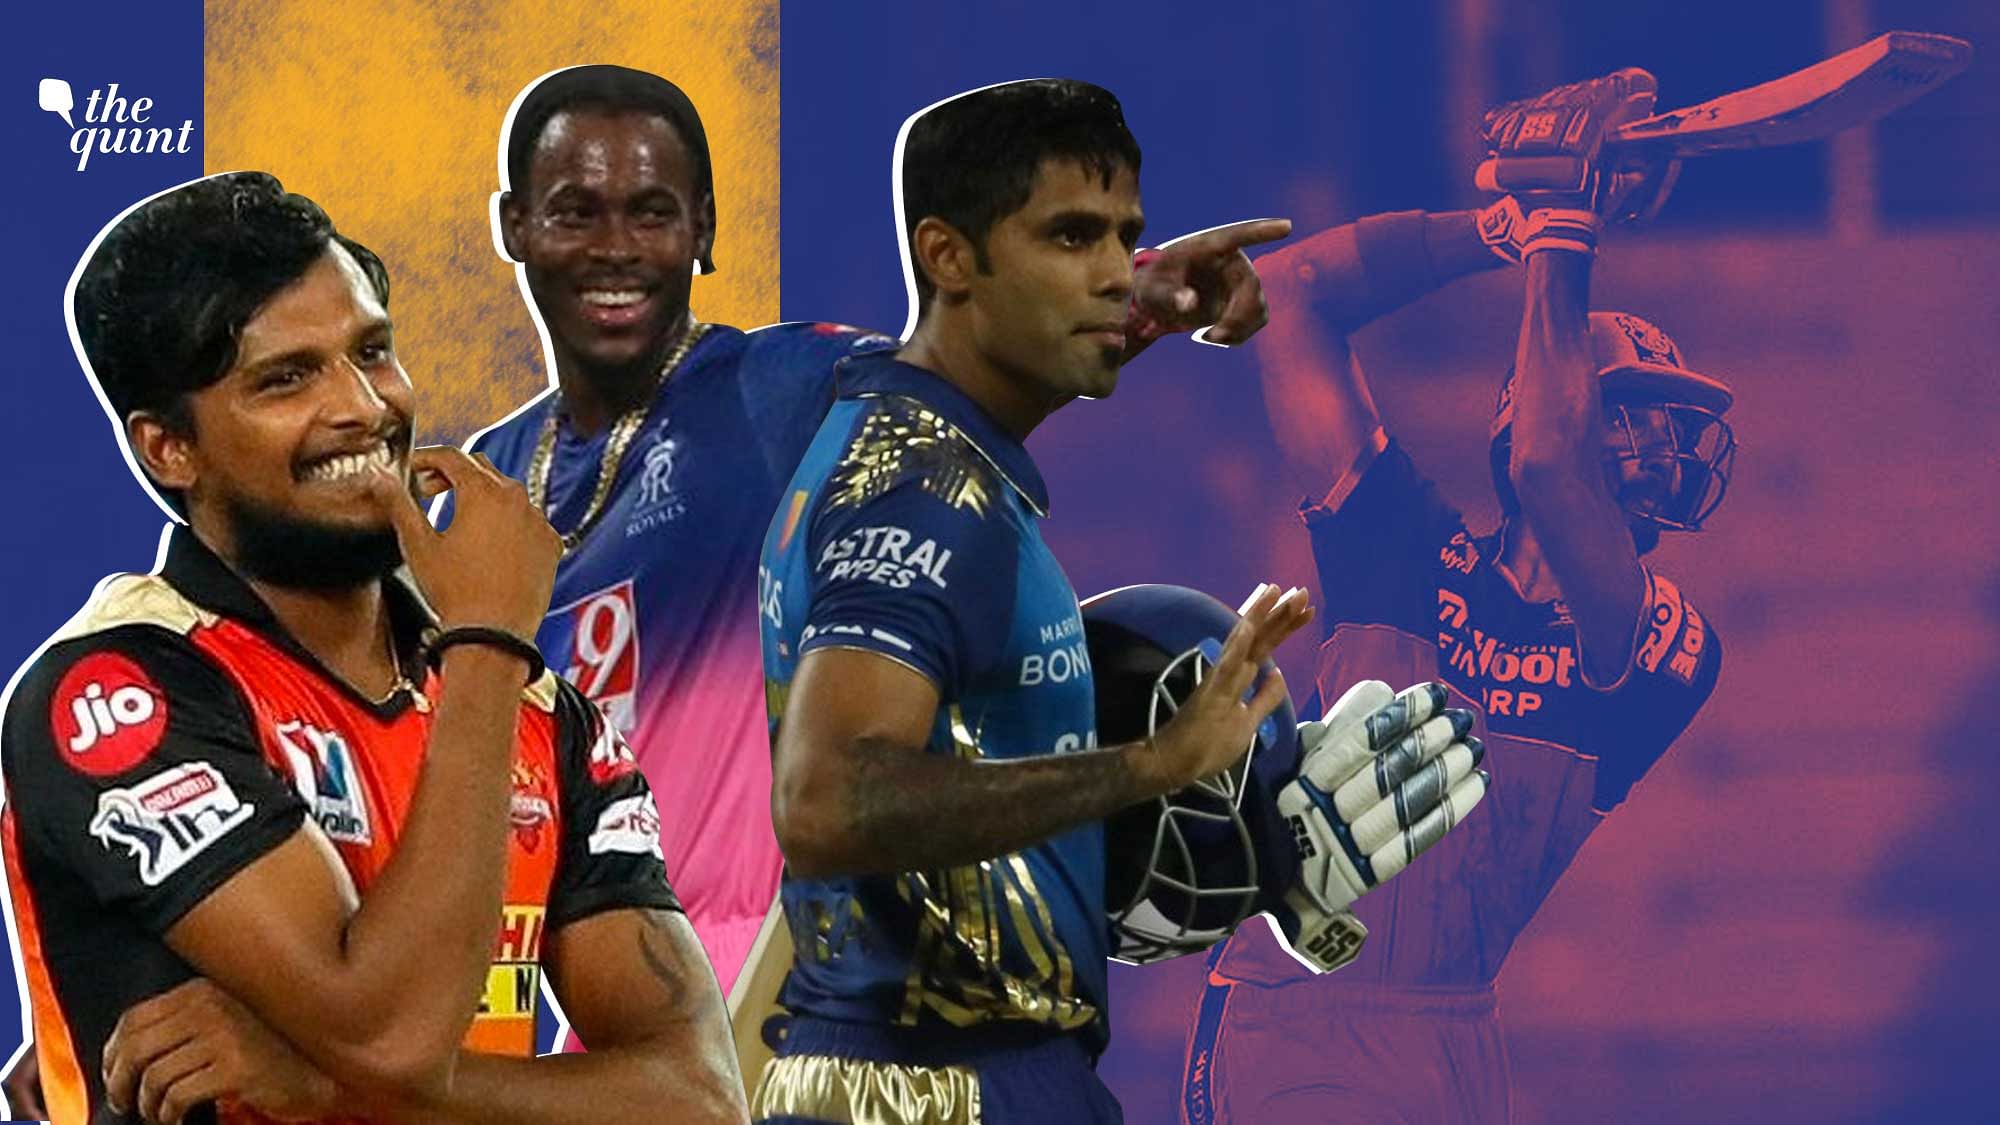 We took a look back at IPL 2020, the most unique season, in search of the top 10 performances from UAE.